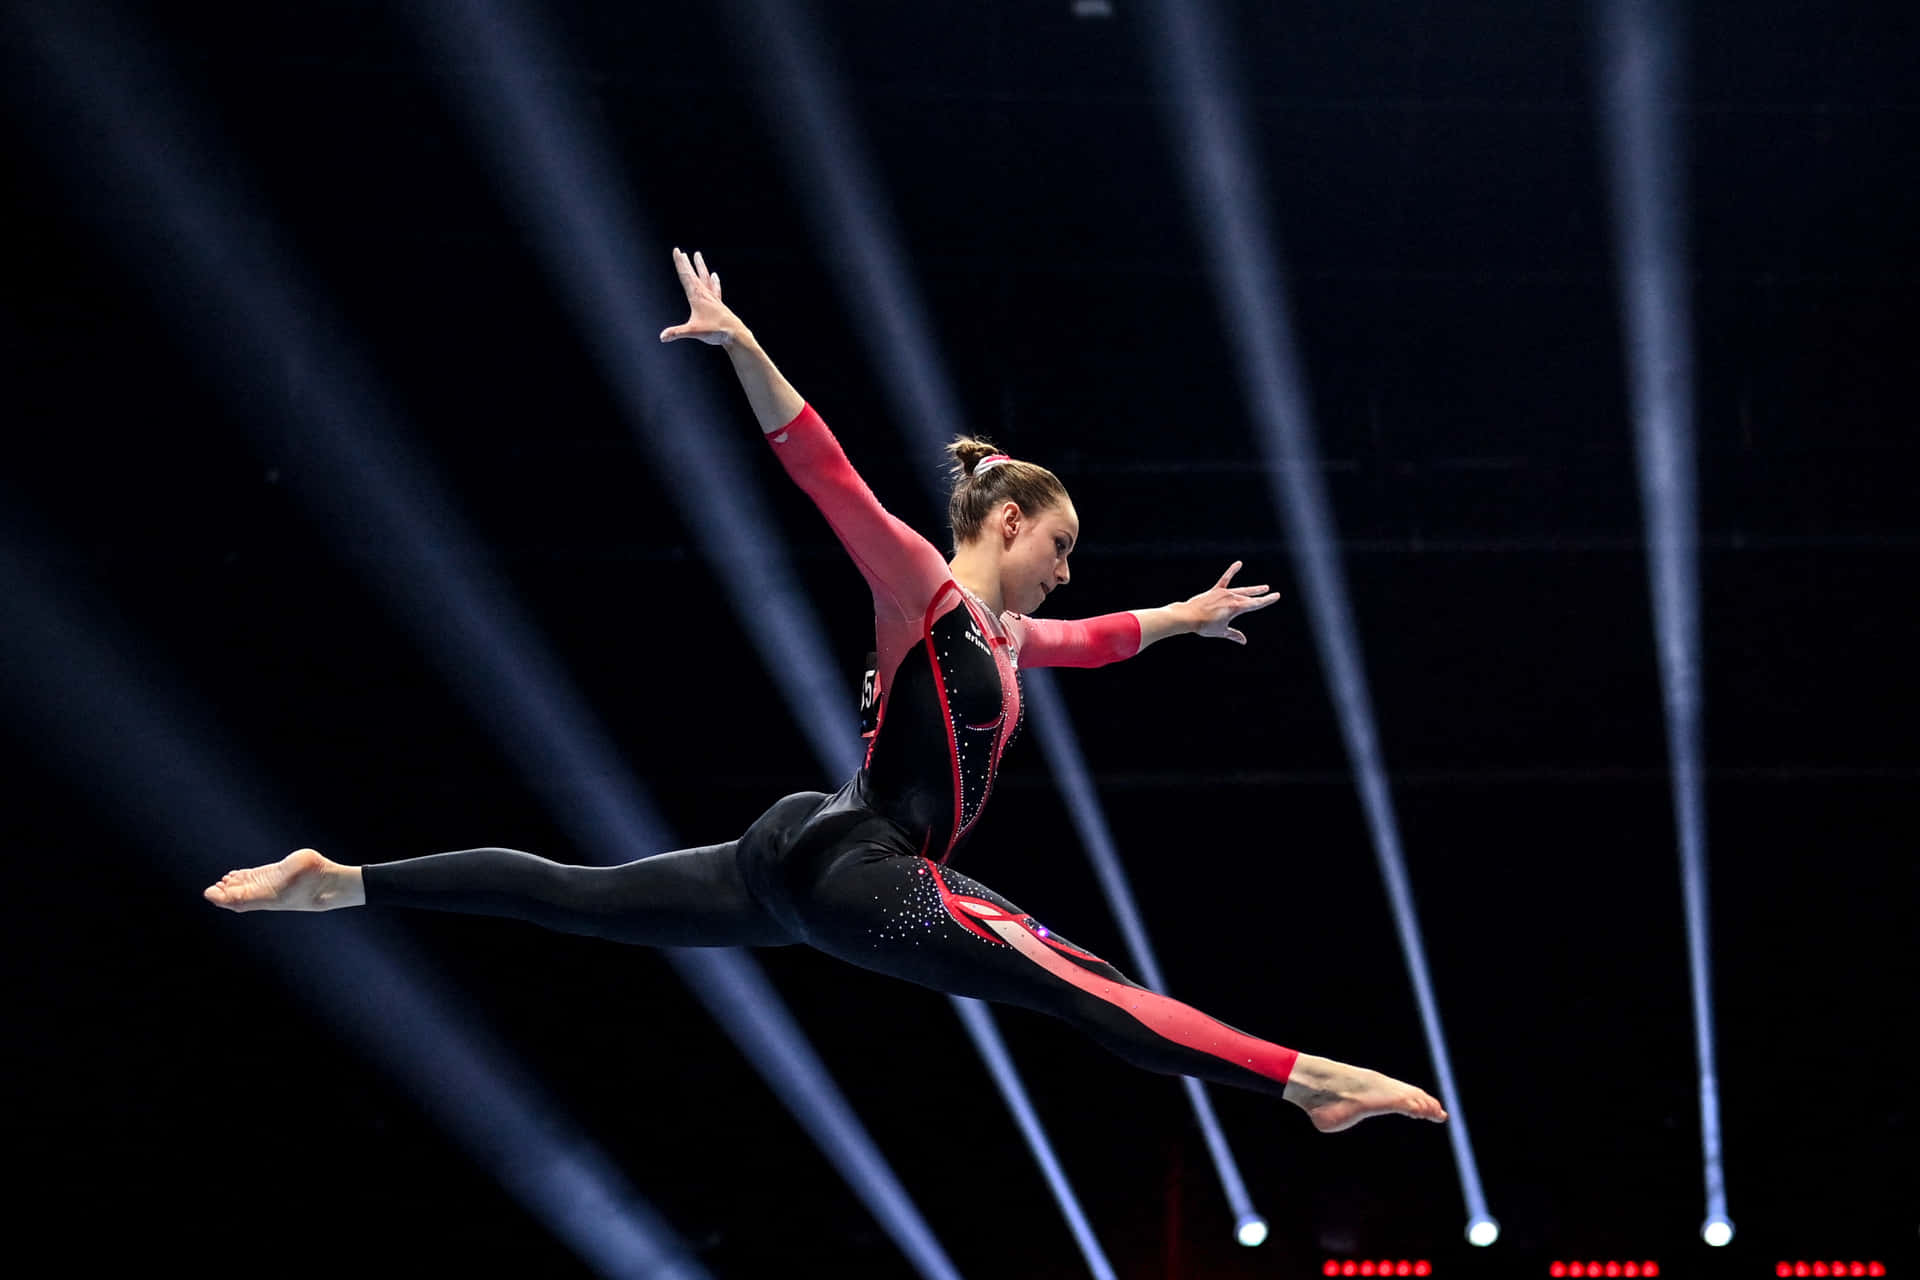 A Gymnast In The Air With Lights On Her Face